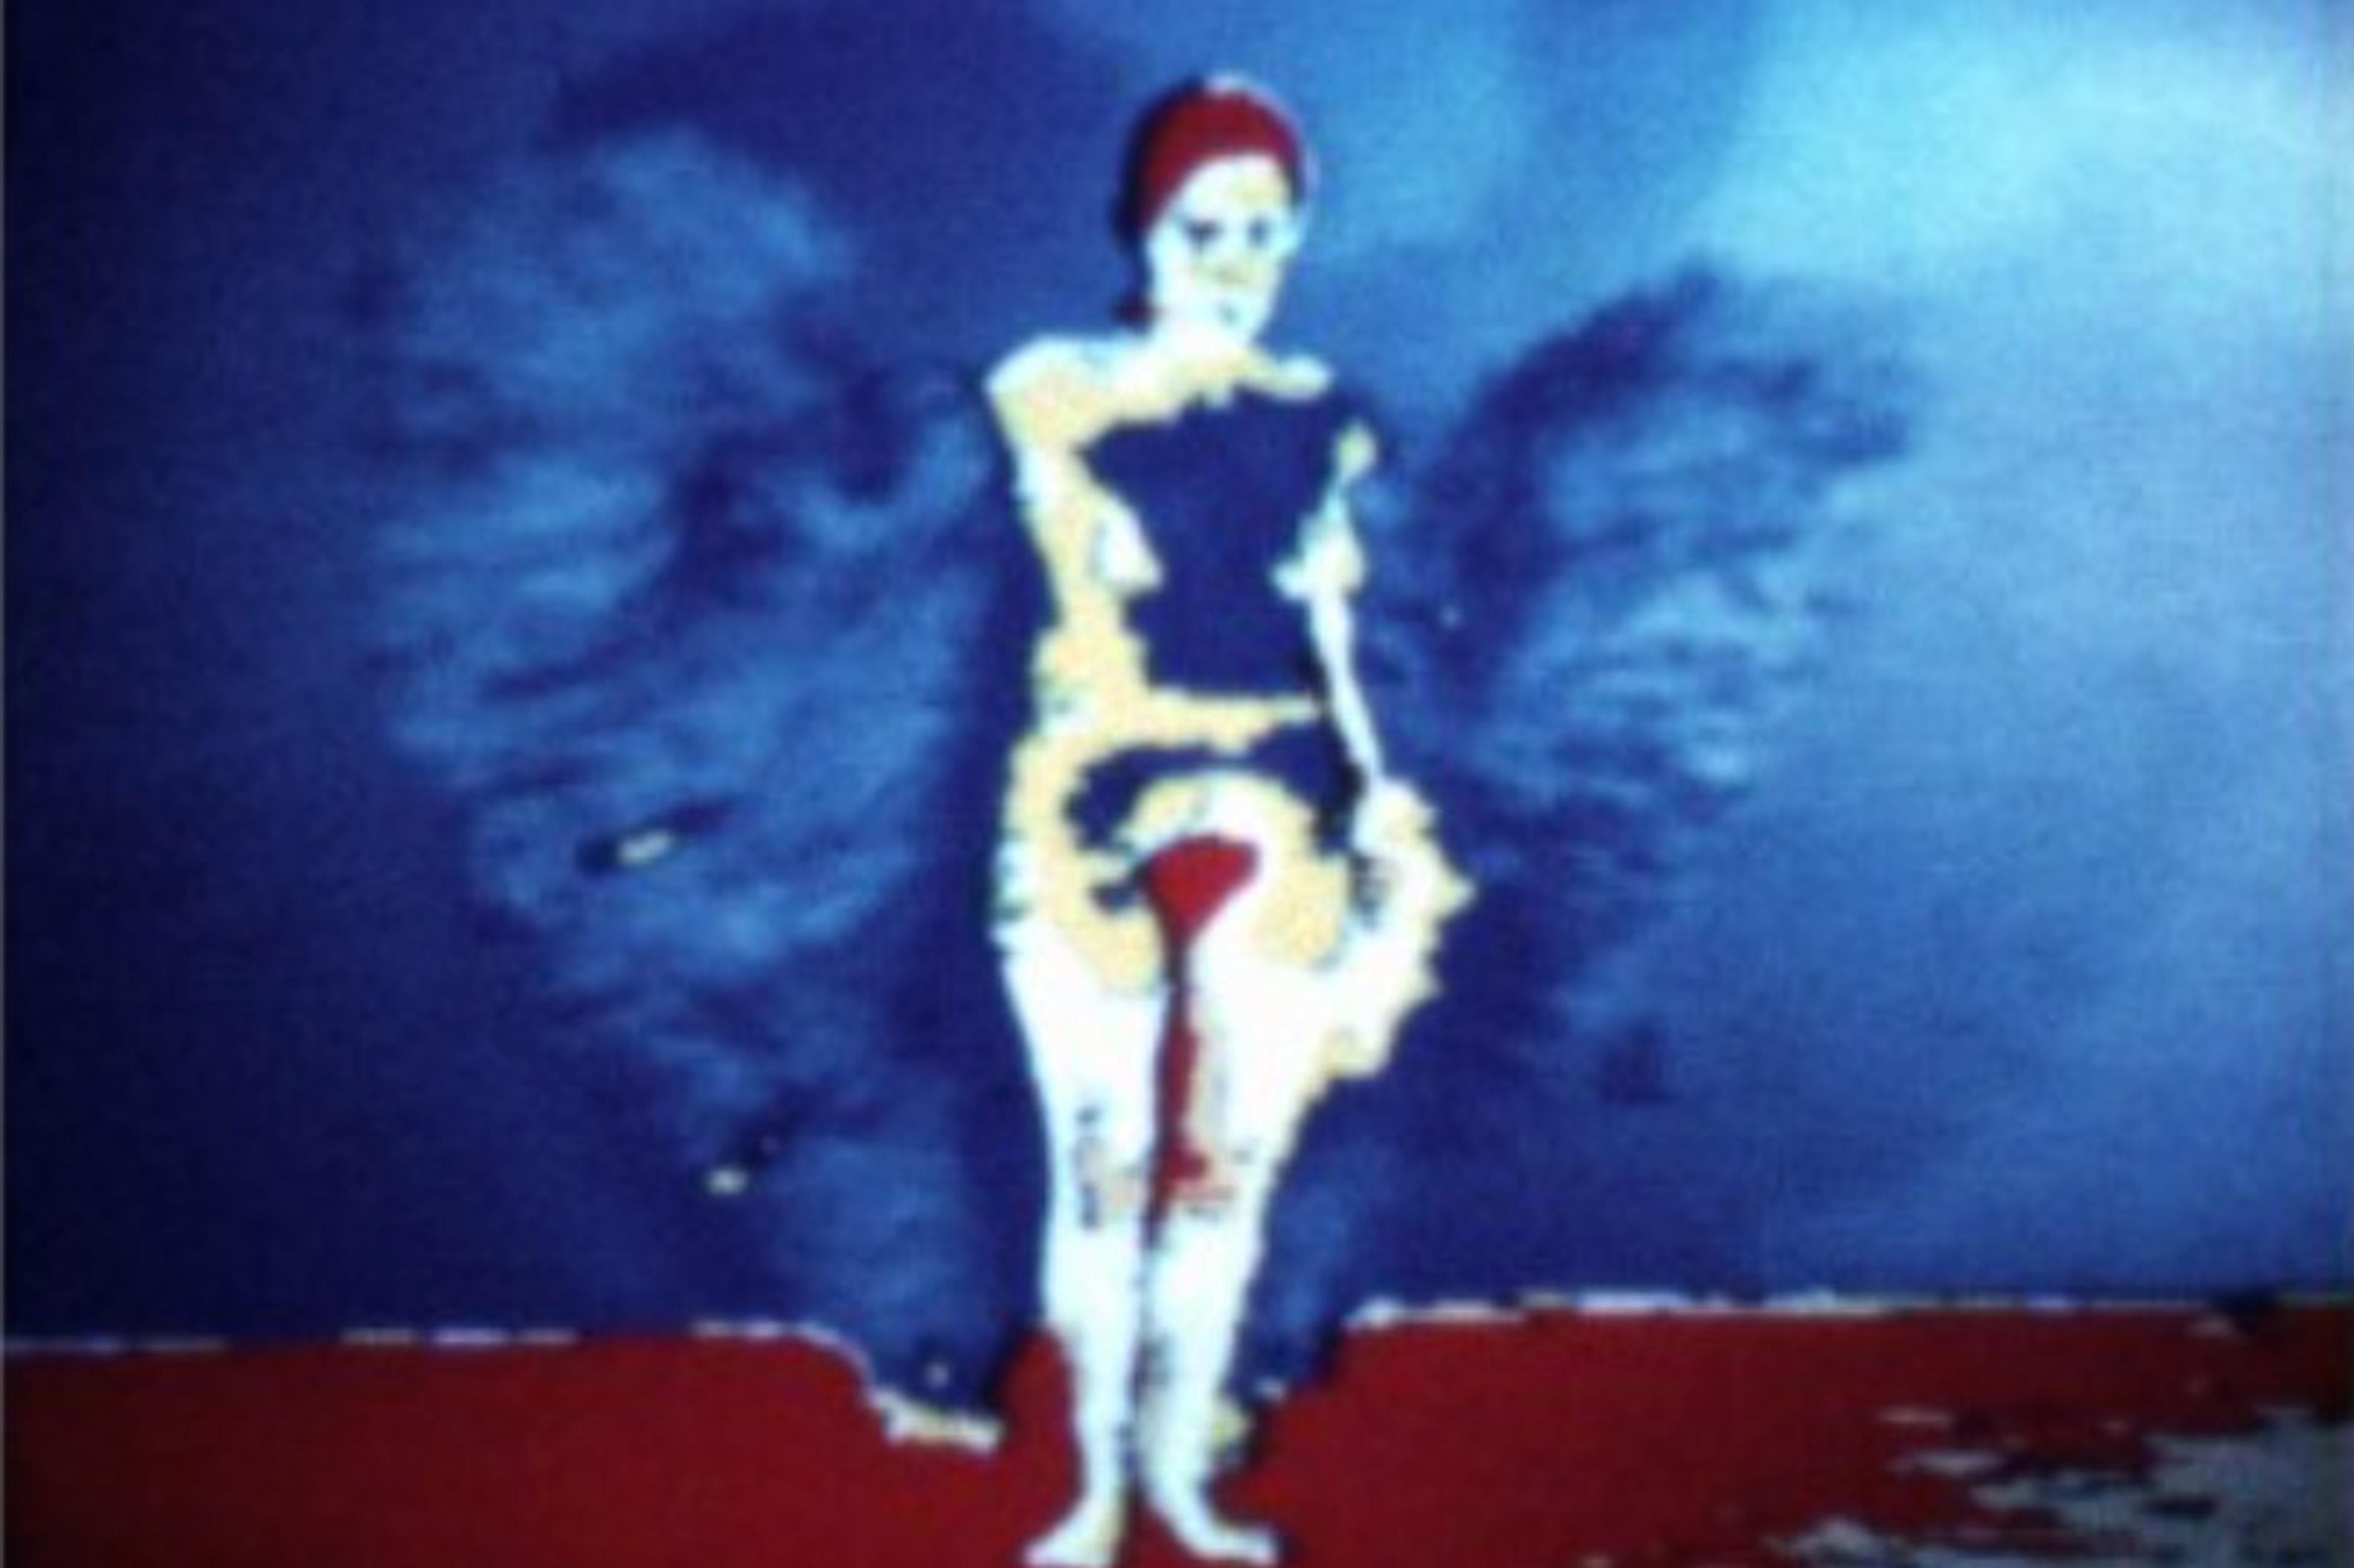 A still from Ana Mendieta’s “Butterfly,” Super-8mm film transferred to high definition digital media. Credit: The Estate of Ana Mendieta Collection, LLC.